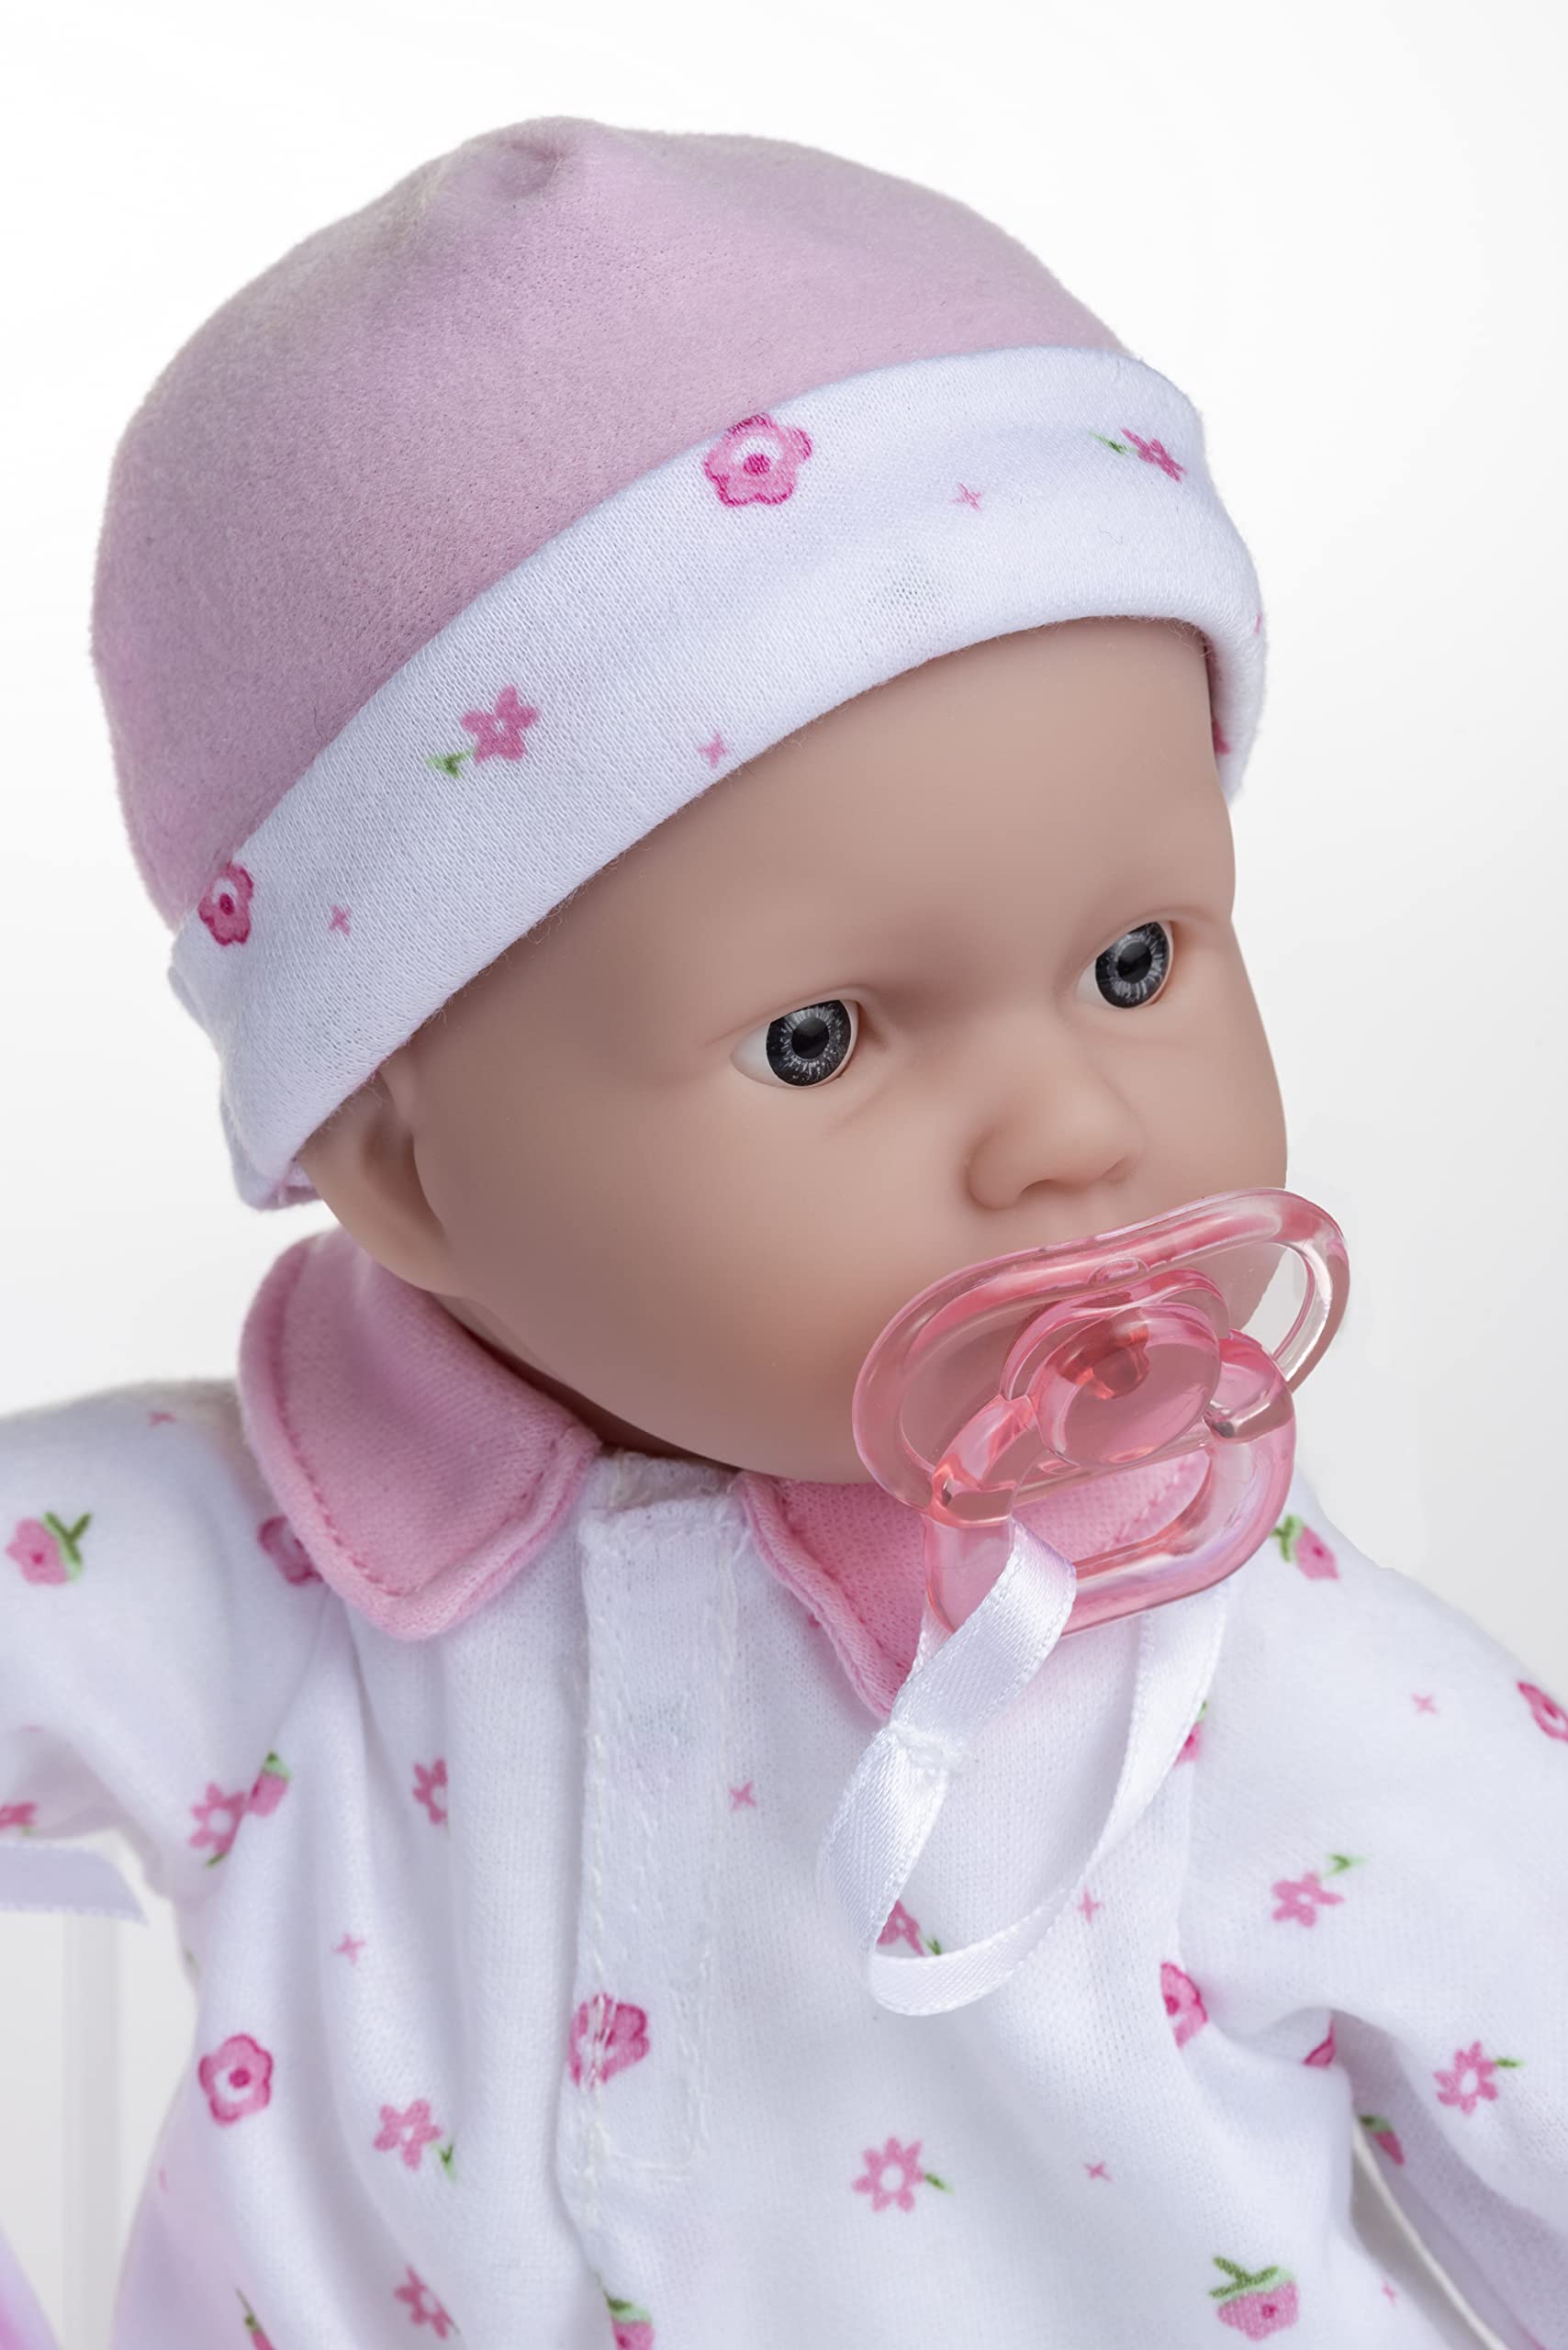 Caucasian 11-inch Small Soft Body Baby Doll | JC Toys - La Baby | Washable |Removable Pink Outfit w/ Hat & Blanket | For Children 12 Months +